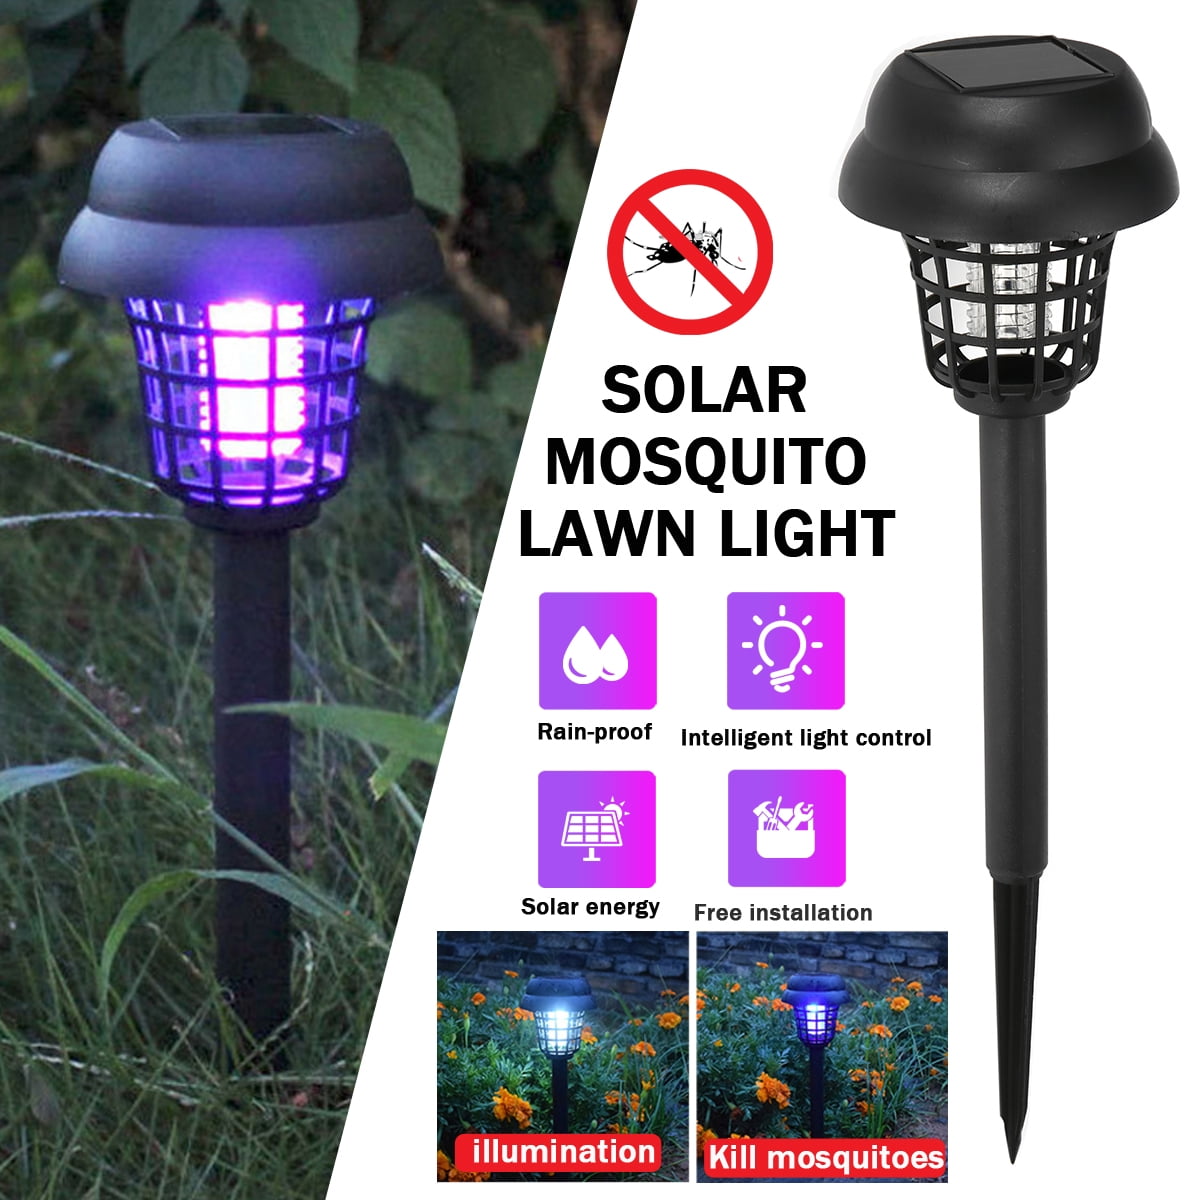 UV LIGHT AND MOSQUITO FLY PEST KILLER ZAPPER LAWN USA ~ 4 SOLAR PATHWAY LED 